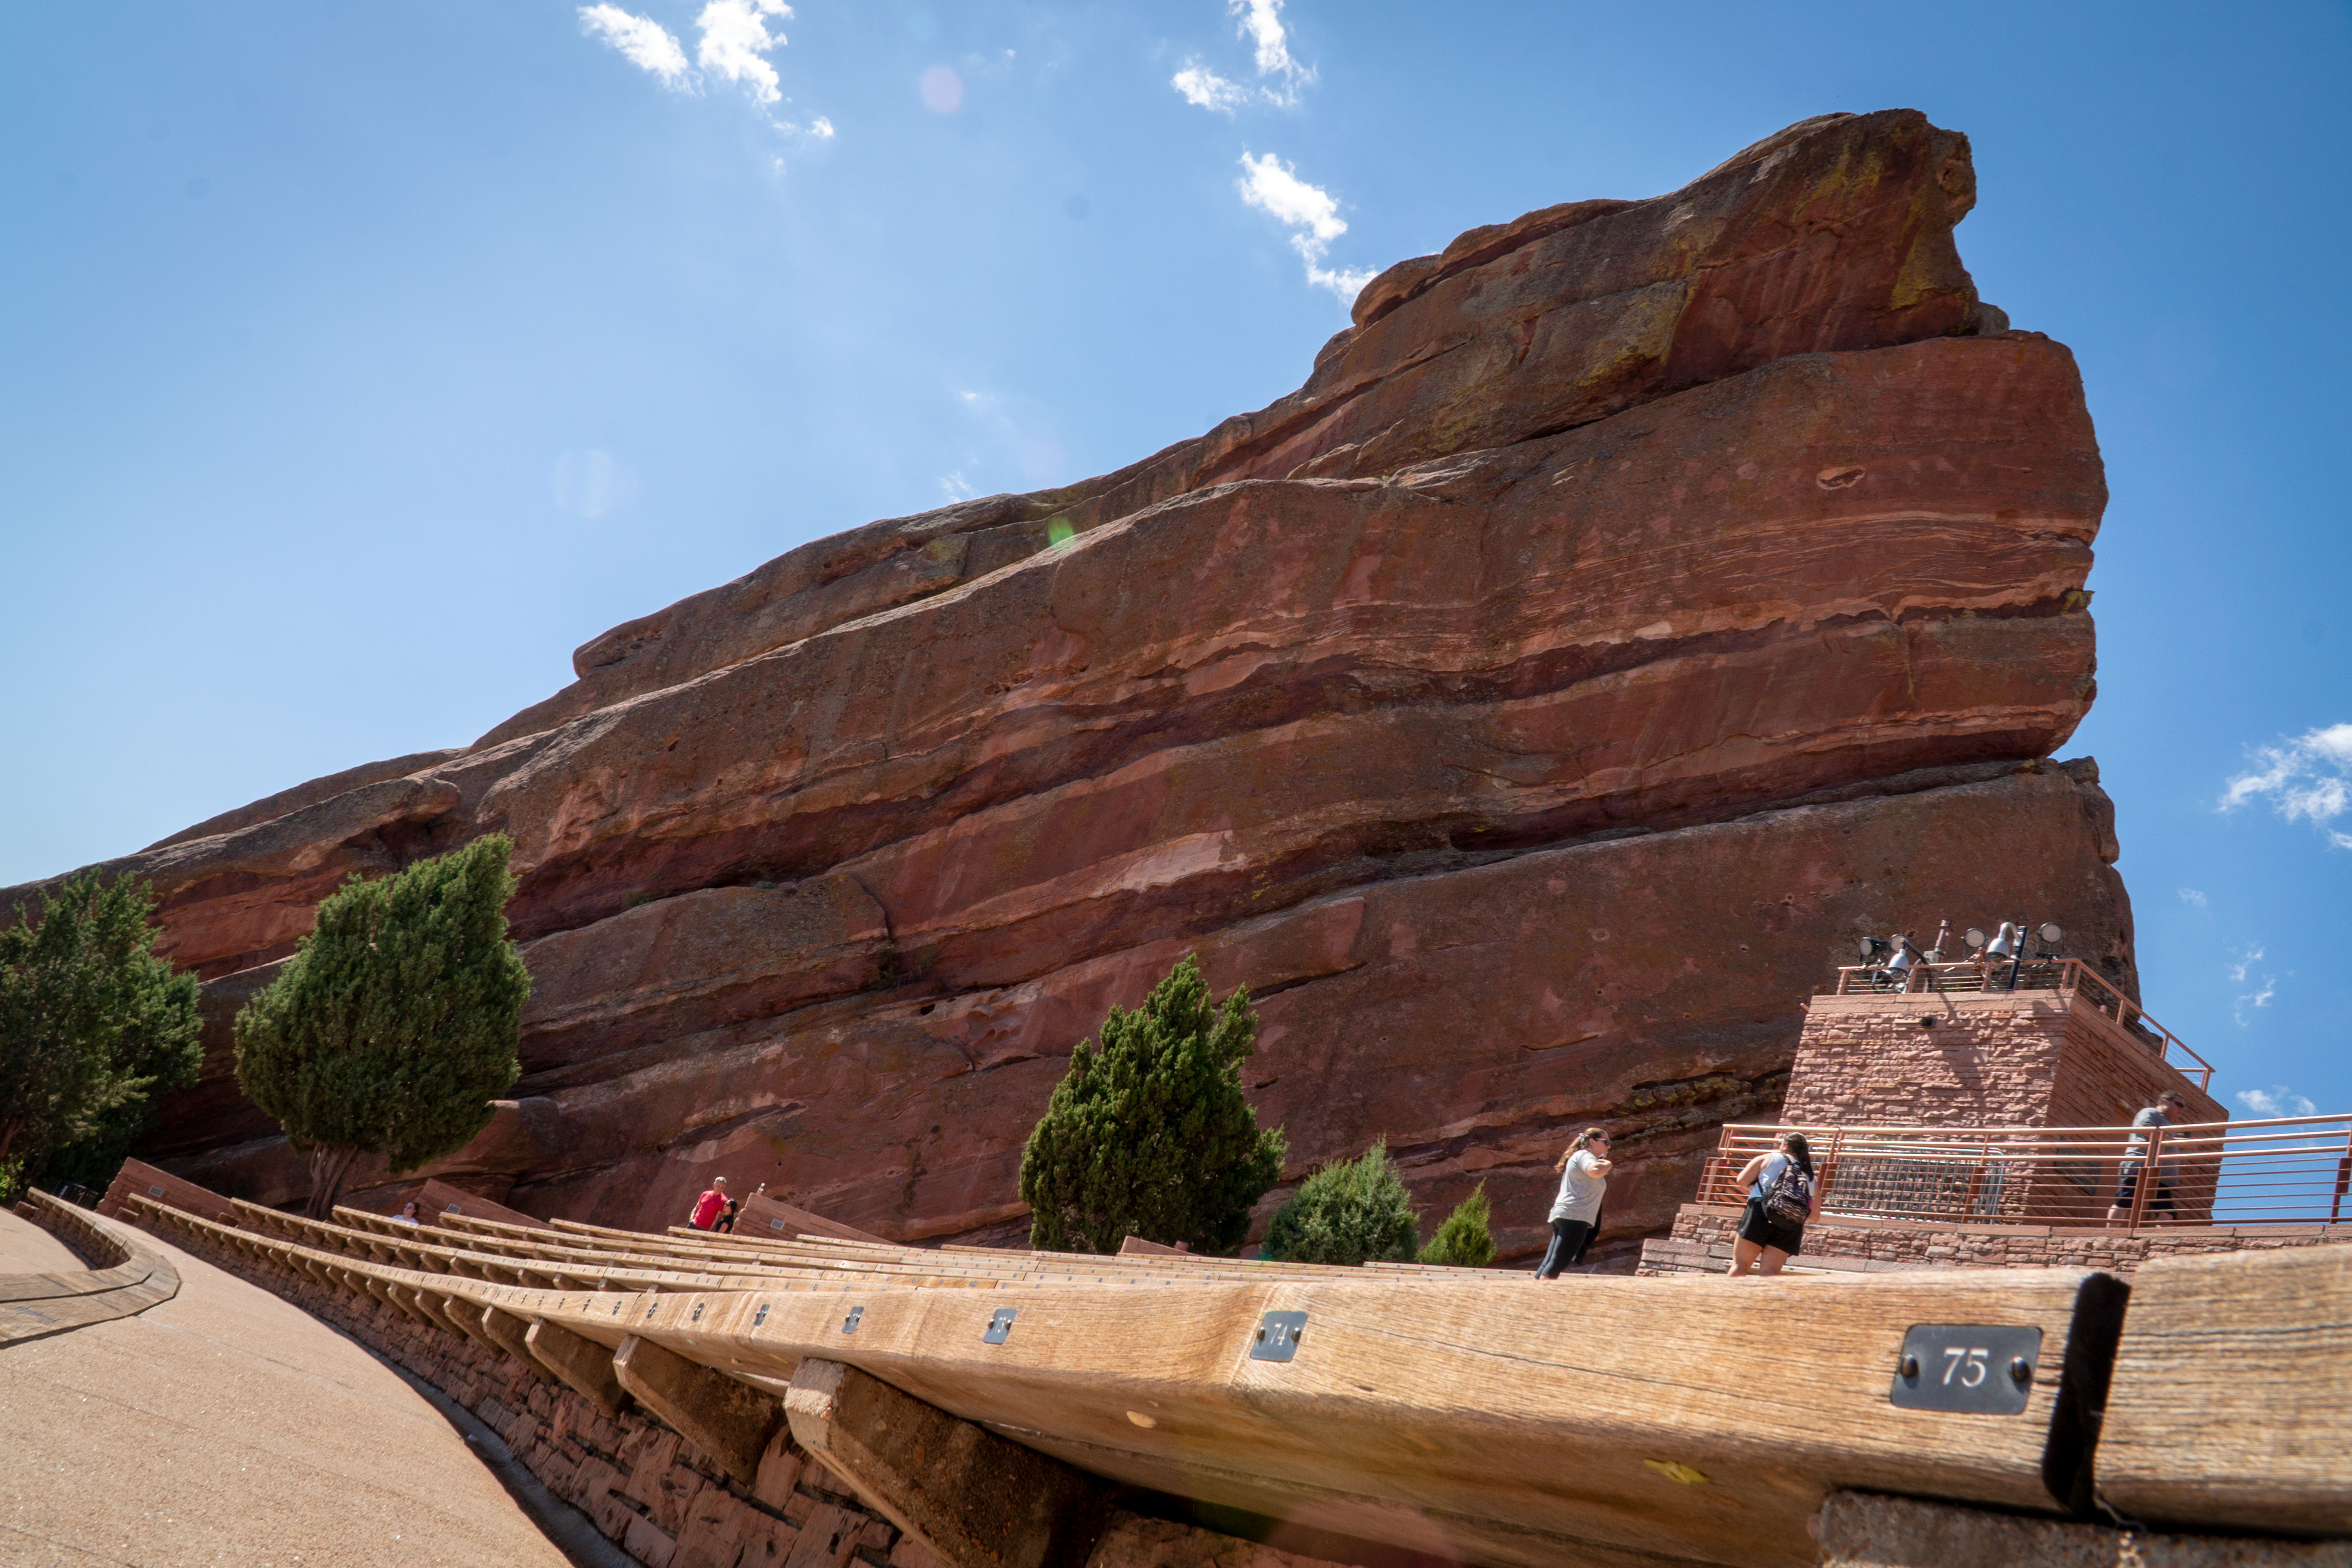 A sunny day at Red Rocks Amphitheatre in Morrison, September 2019.